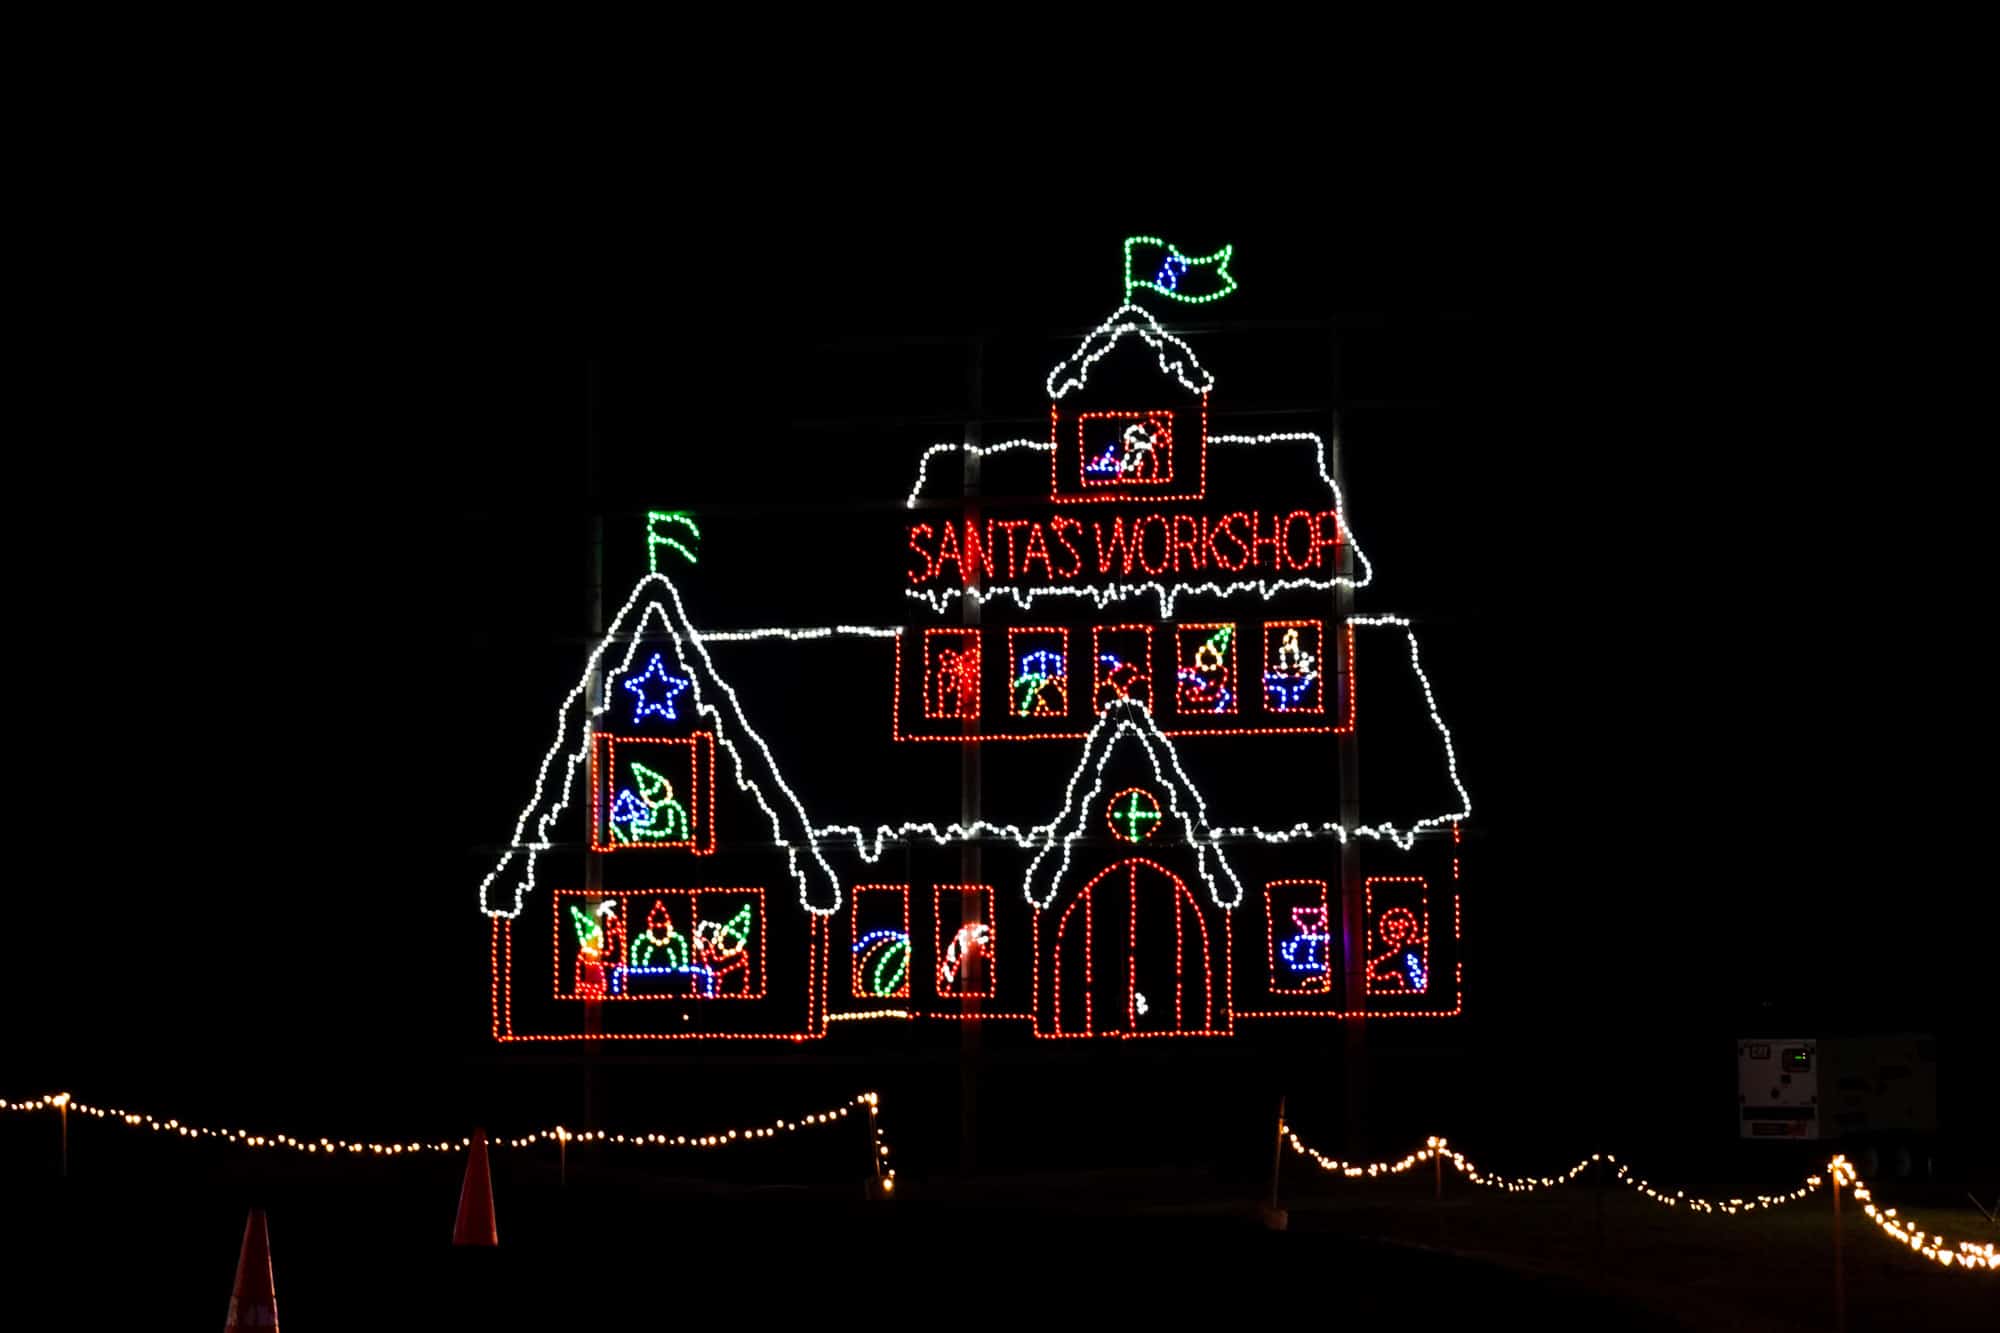 Christmas light display in the shape of a house with a sign for "Santa's Workshop"